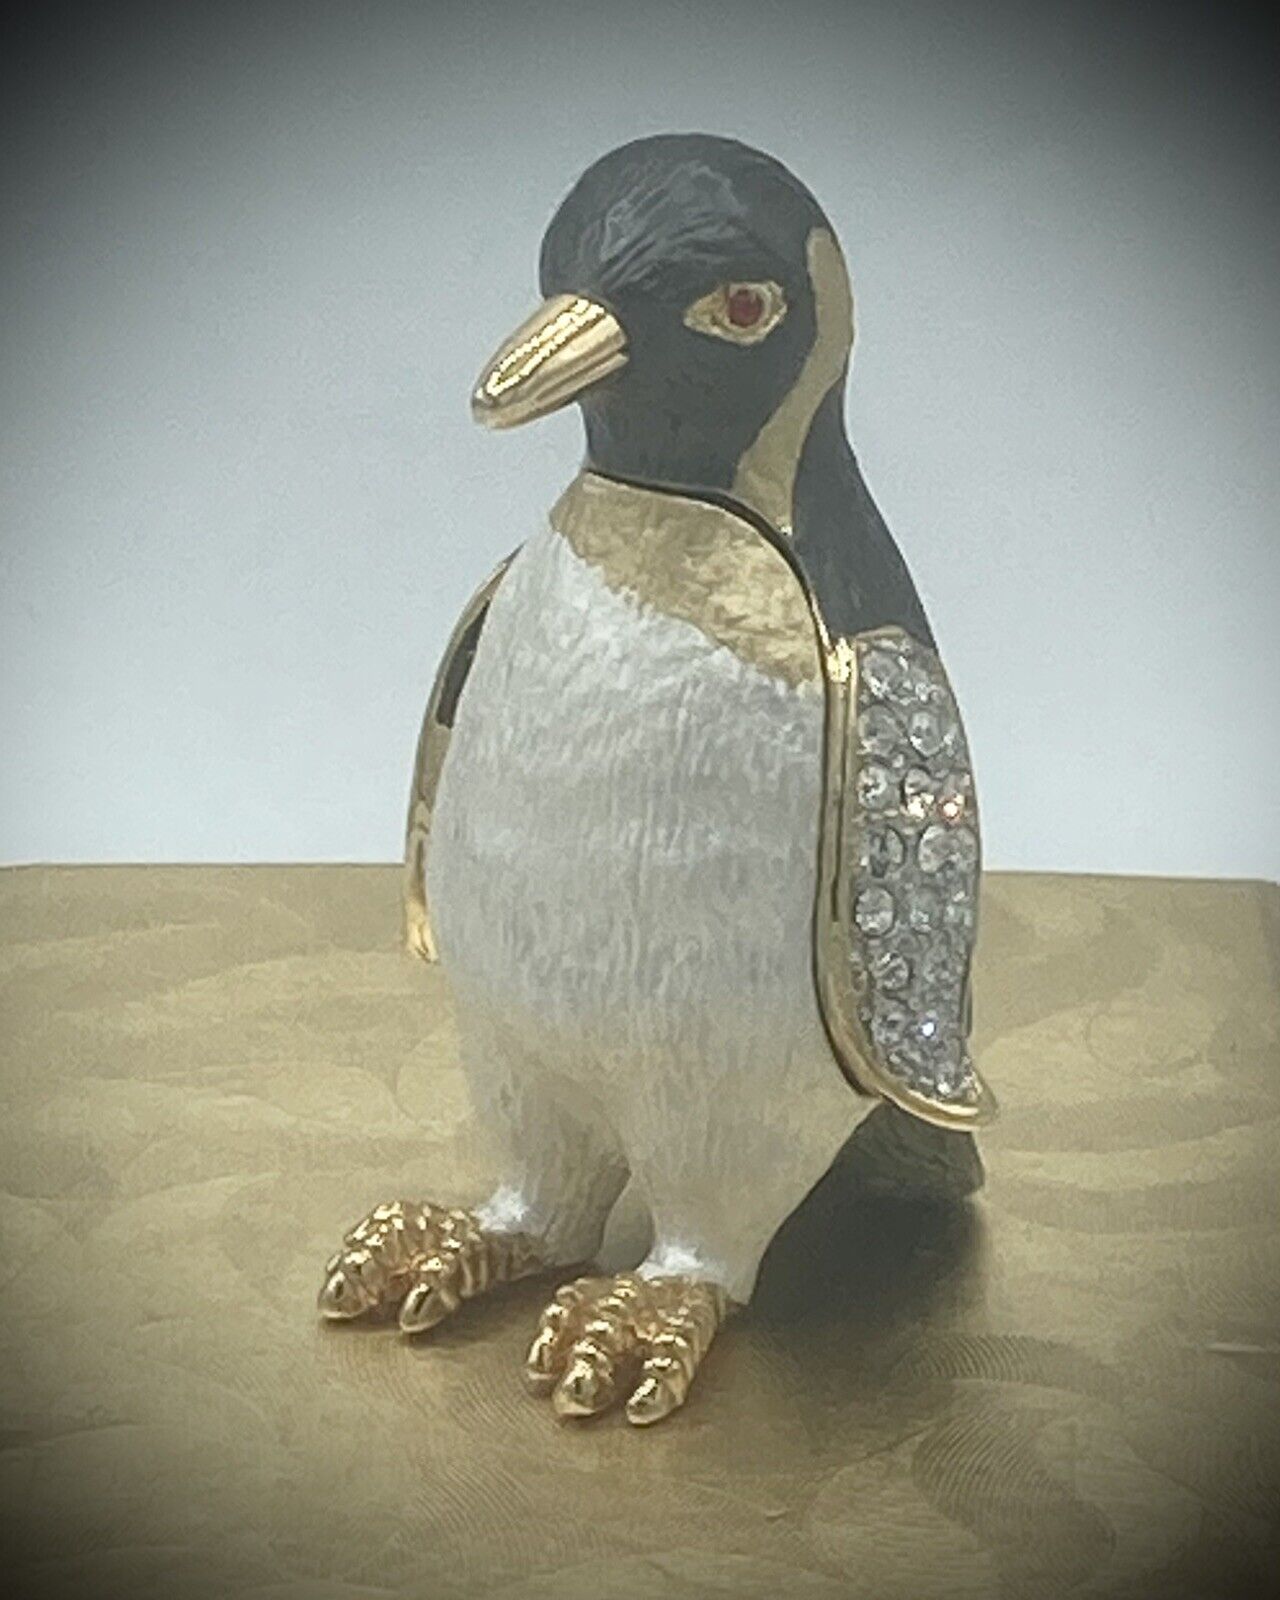 Bejeweled Enamel collectible penguin trinket jewelry box 2” Tall